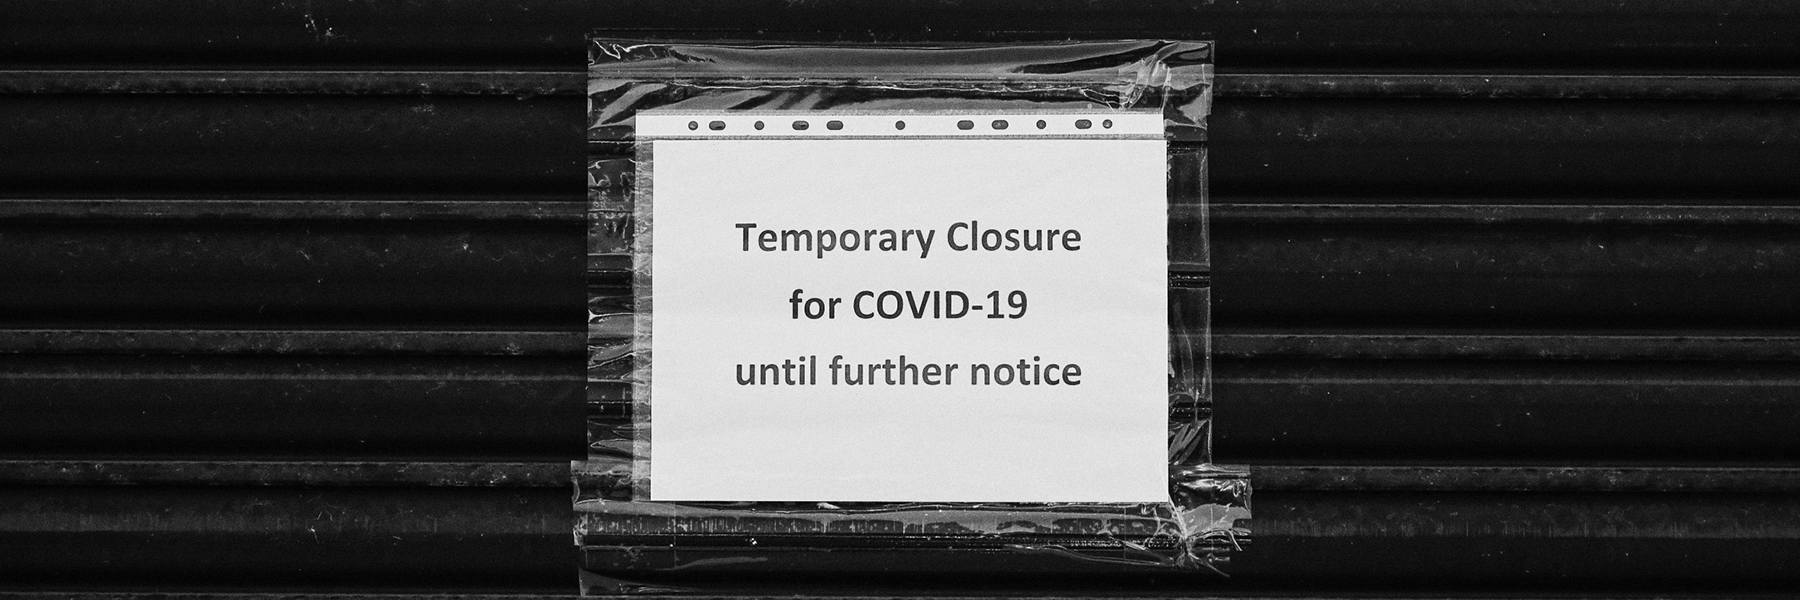 A sign indicating the closure of a building mid-pandemic. Image: Getty